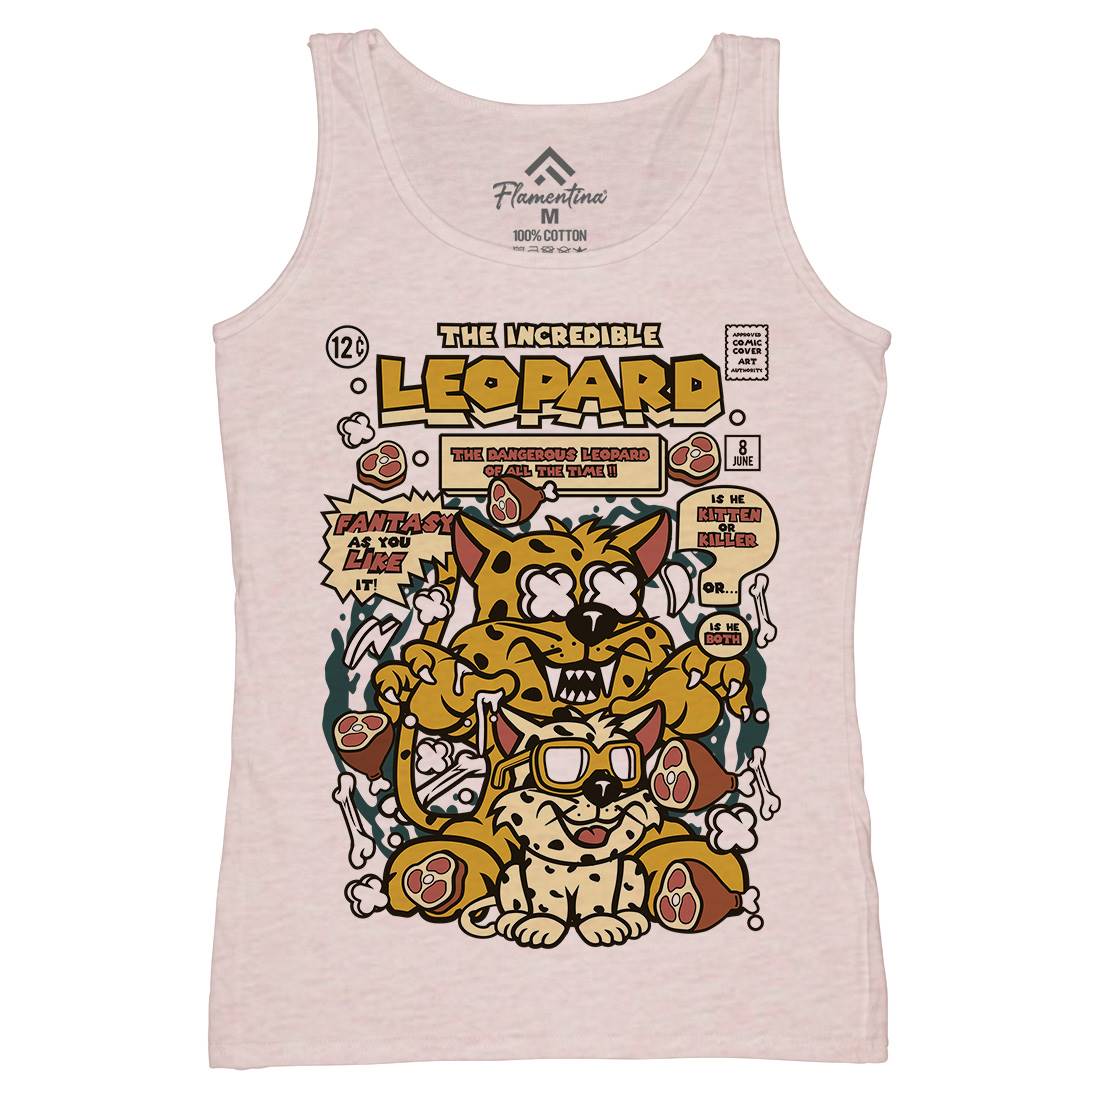 The Incredible Leopard Womens Organic Tank Top Vest Animals C677